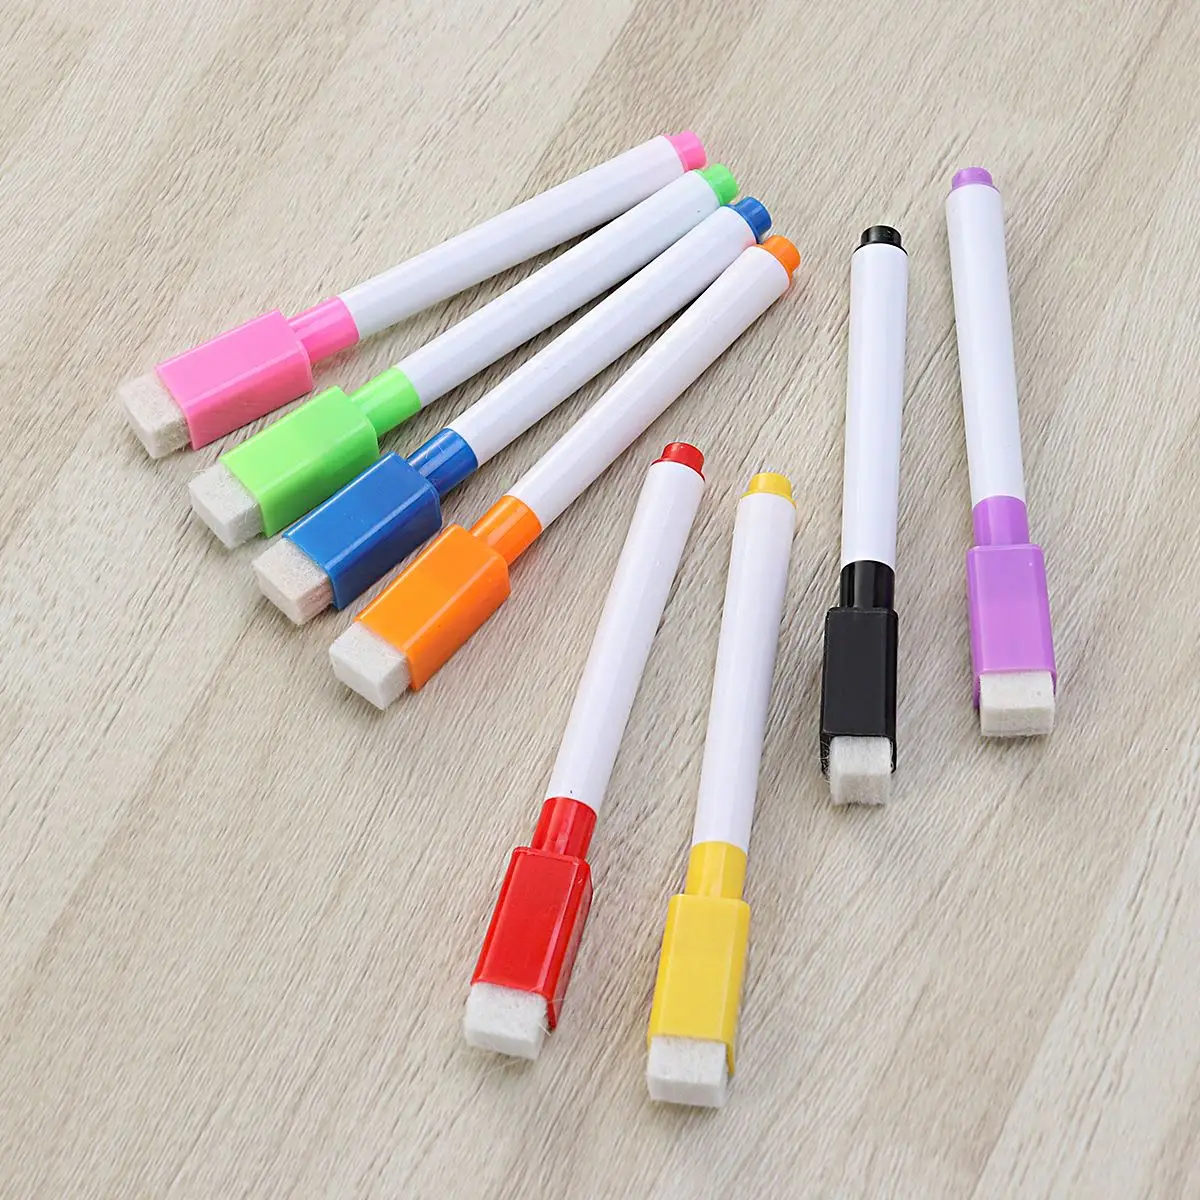 8pcs Magnetic Colorful Whiteboard Pen Black Pink Colored Pencils Built In Eraser School Supplies Children's Drawing Pen